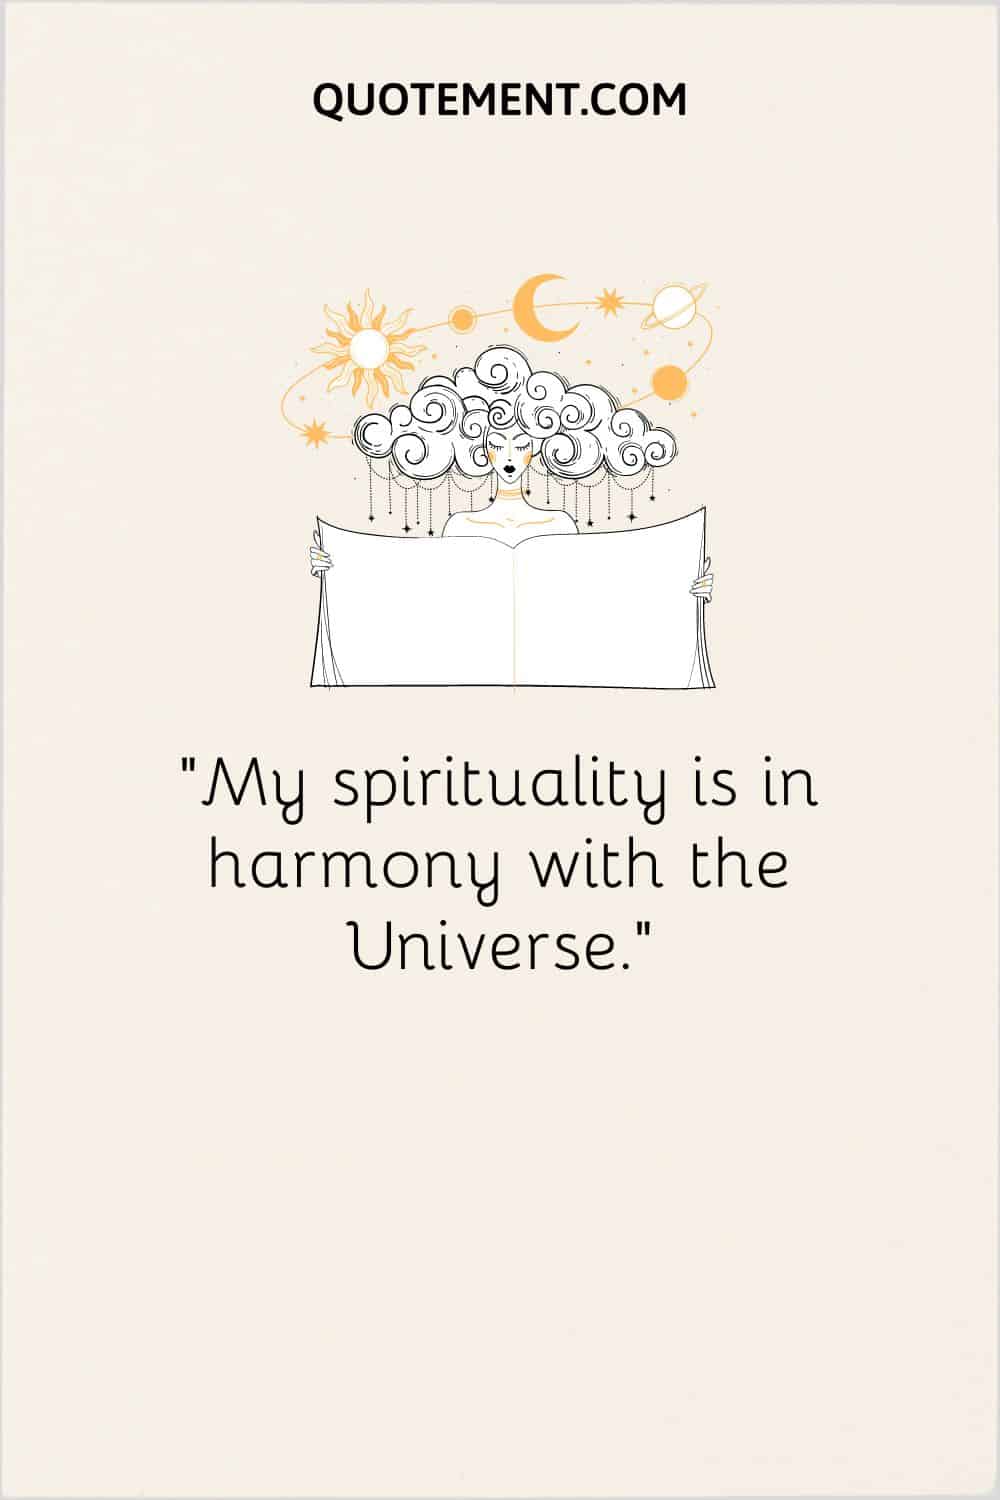 My spirituality is in harmony with the Universe